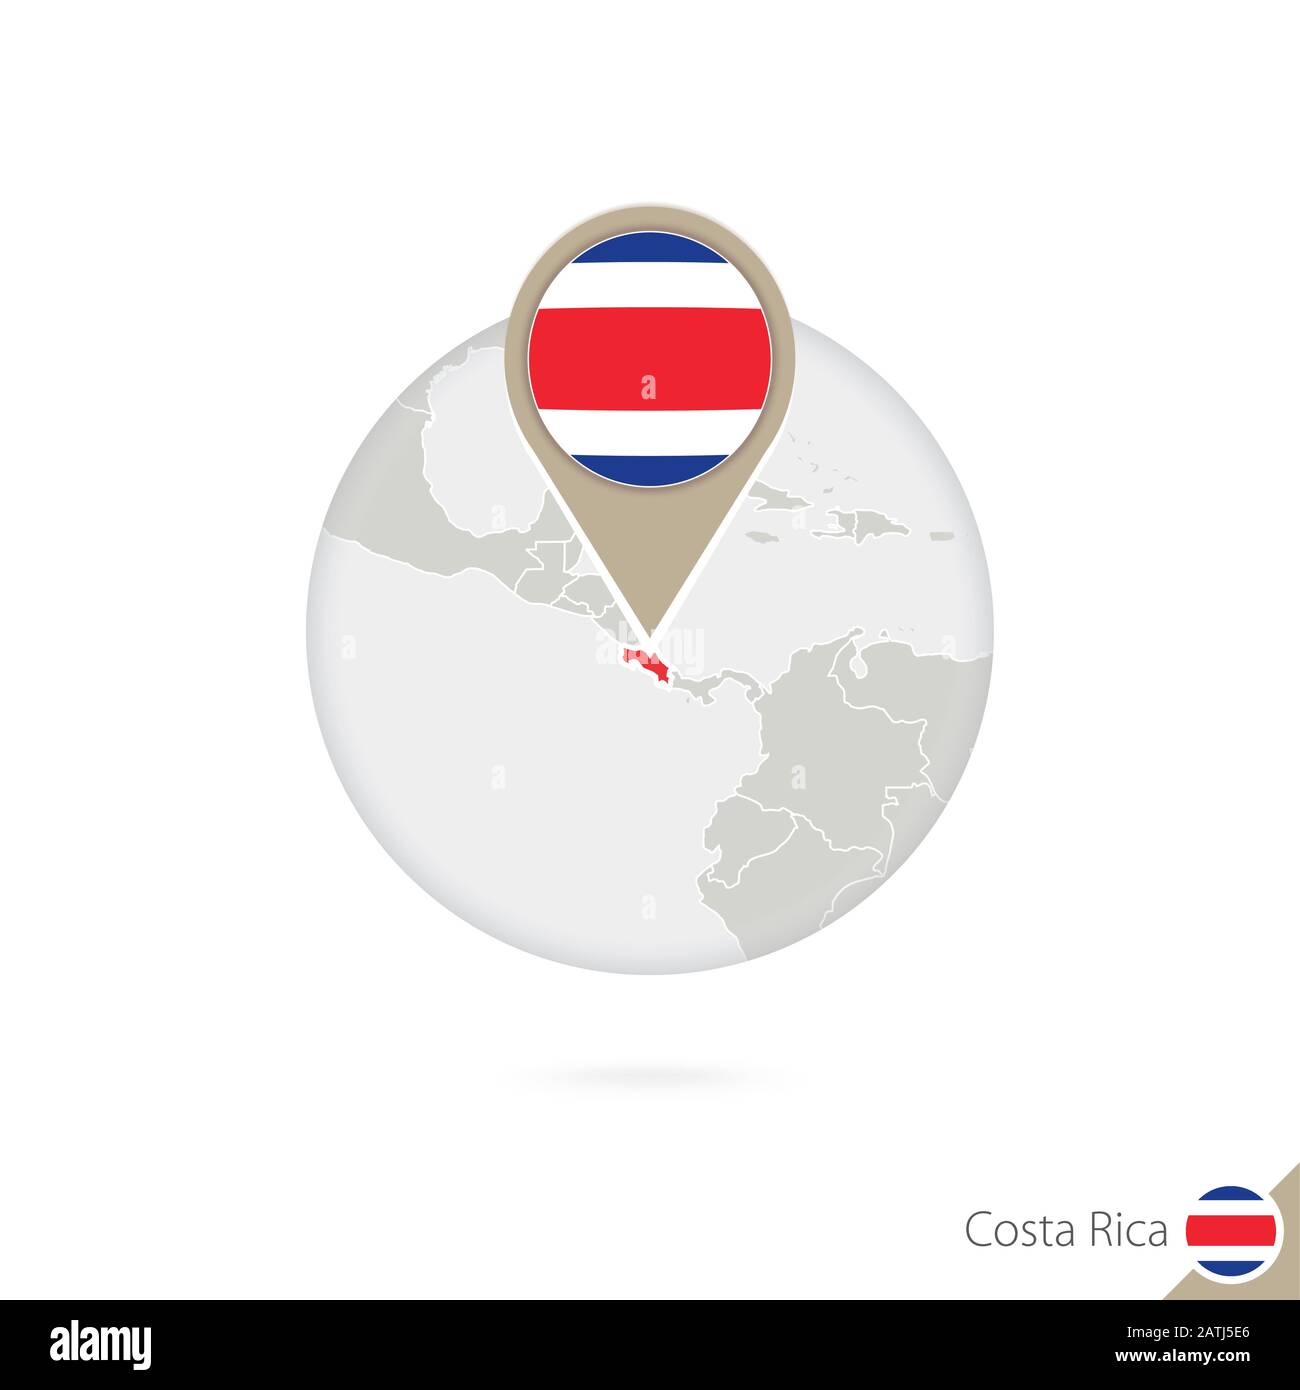 Costa Rica map and flag in circle. Map of Costa Rica, Costa Rica flag pin. Map of Costa Rica in the style of the globe. Vector Illustration. Stock Vector